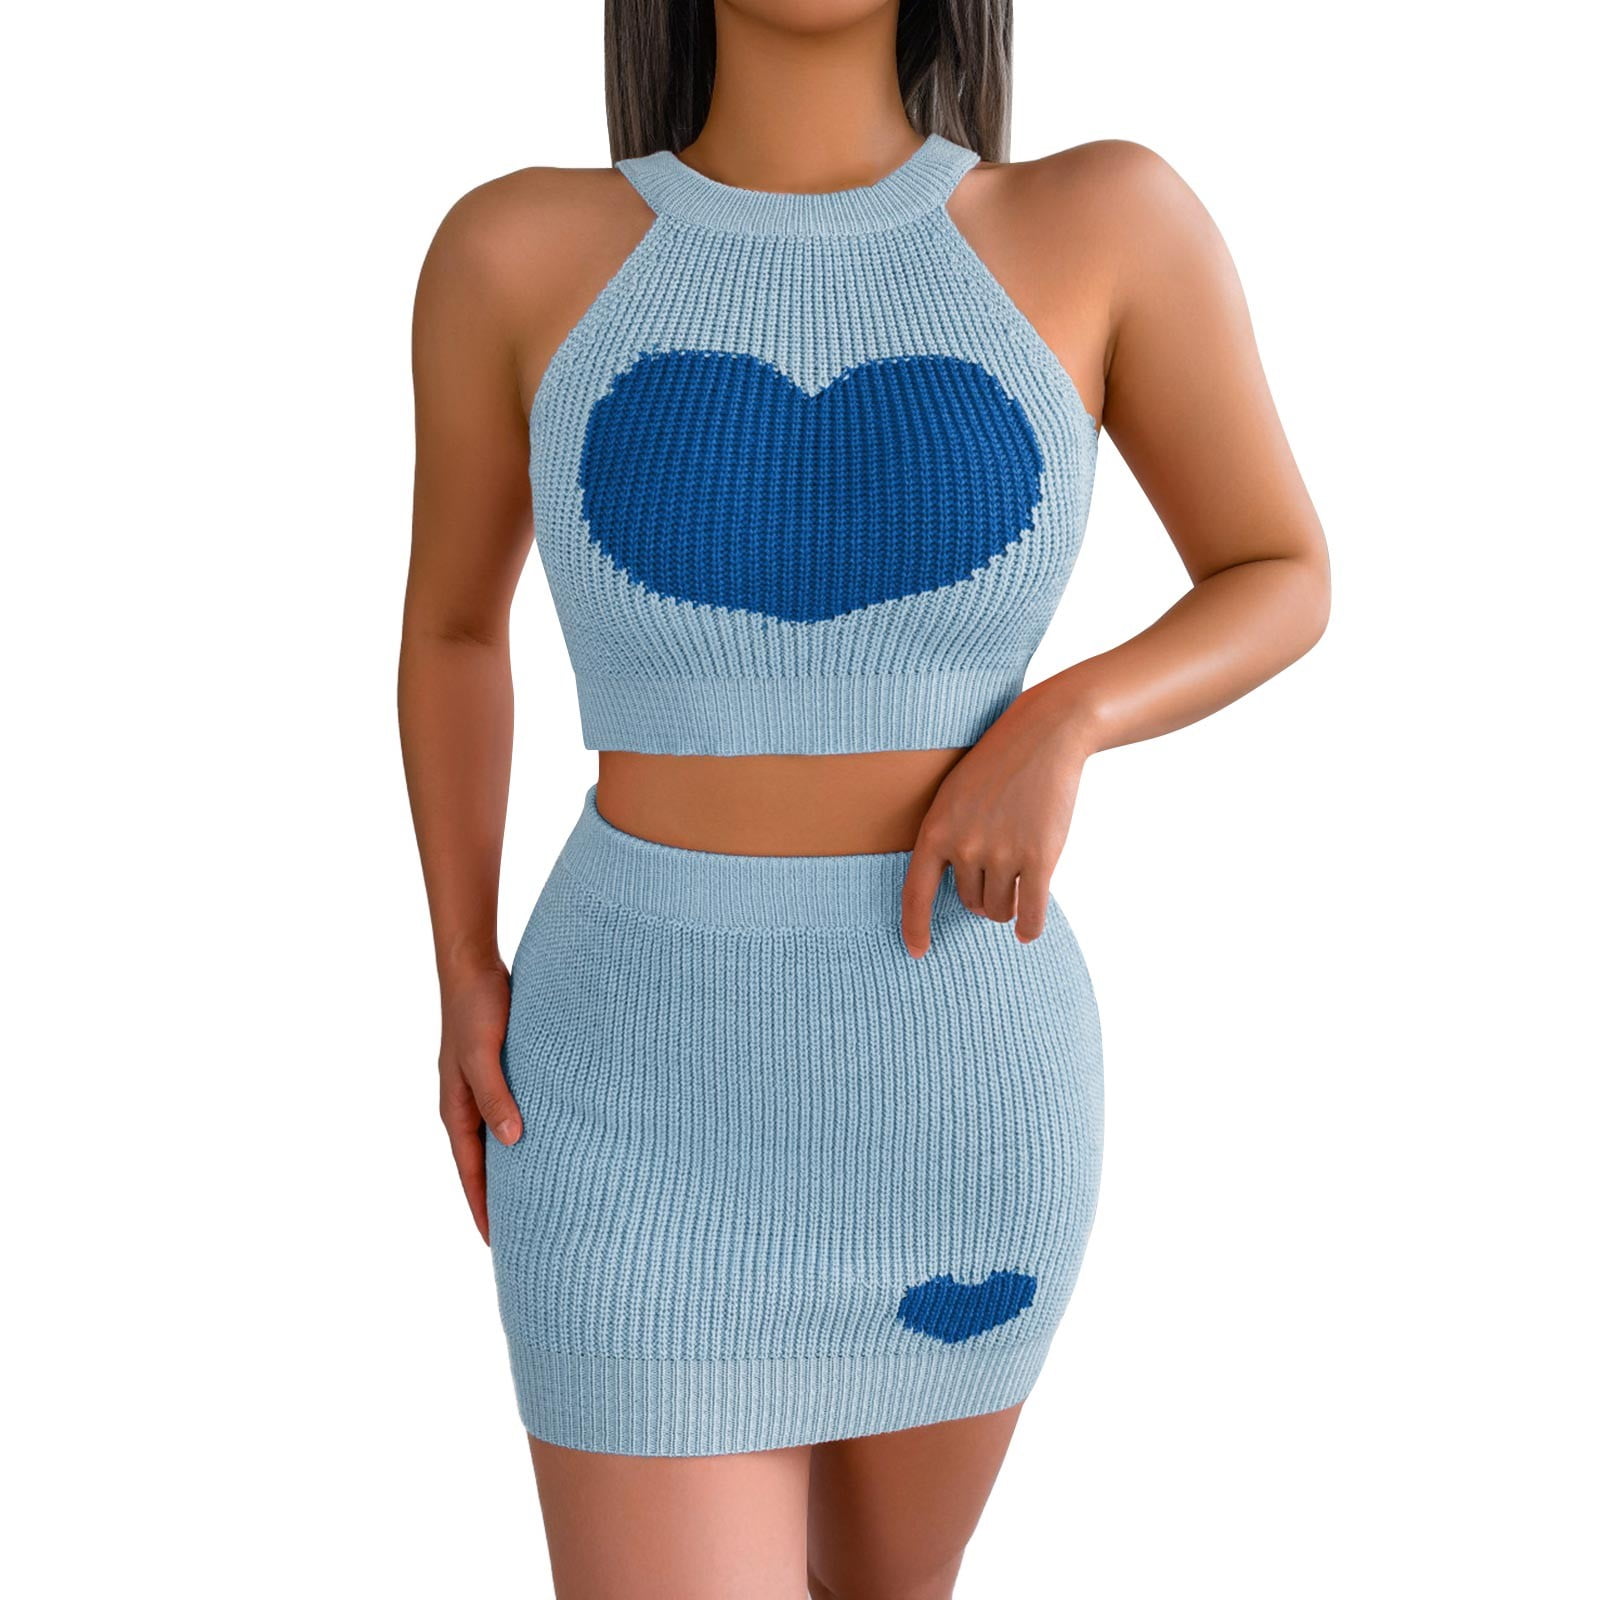 Women Two Piece Outfit Sets Short Sexy Skirt Cotton Yoga